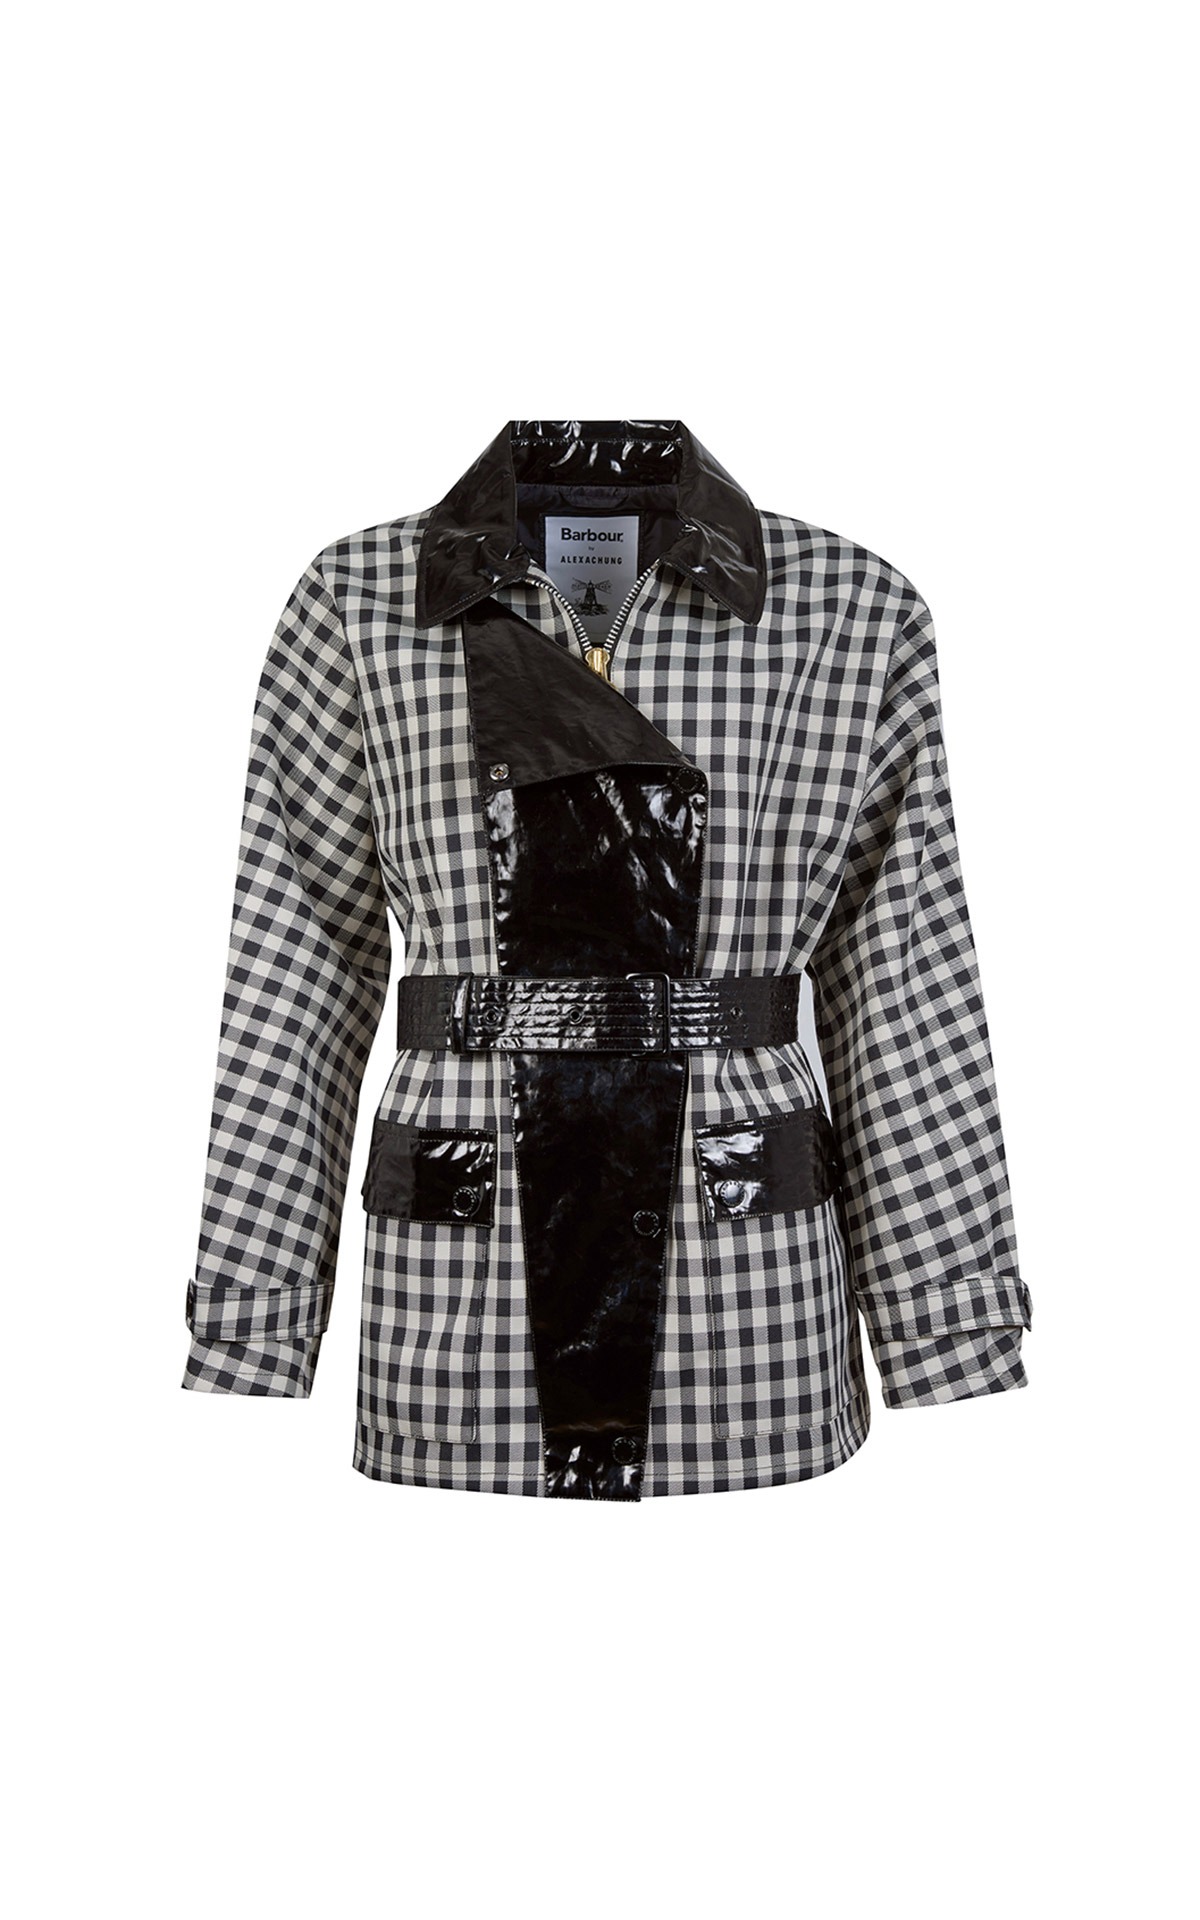 Black and white checked jacket with Barbour patent leather accents Barbour